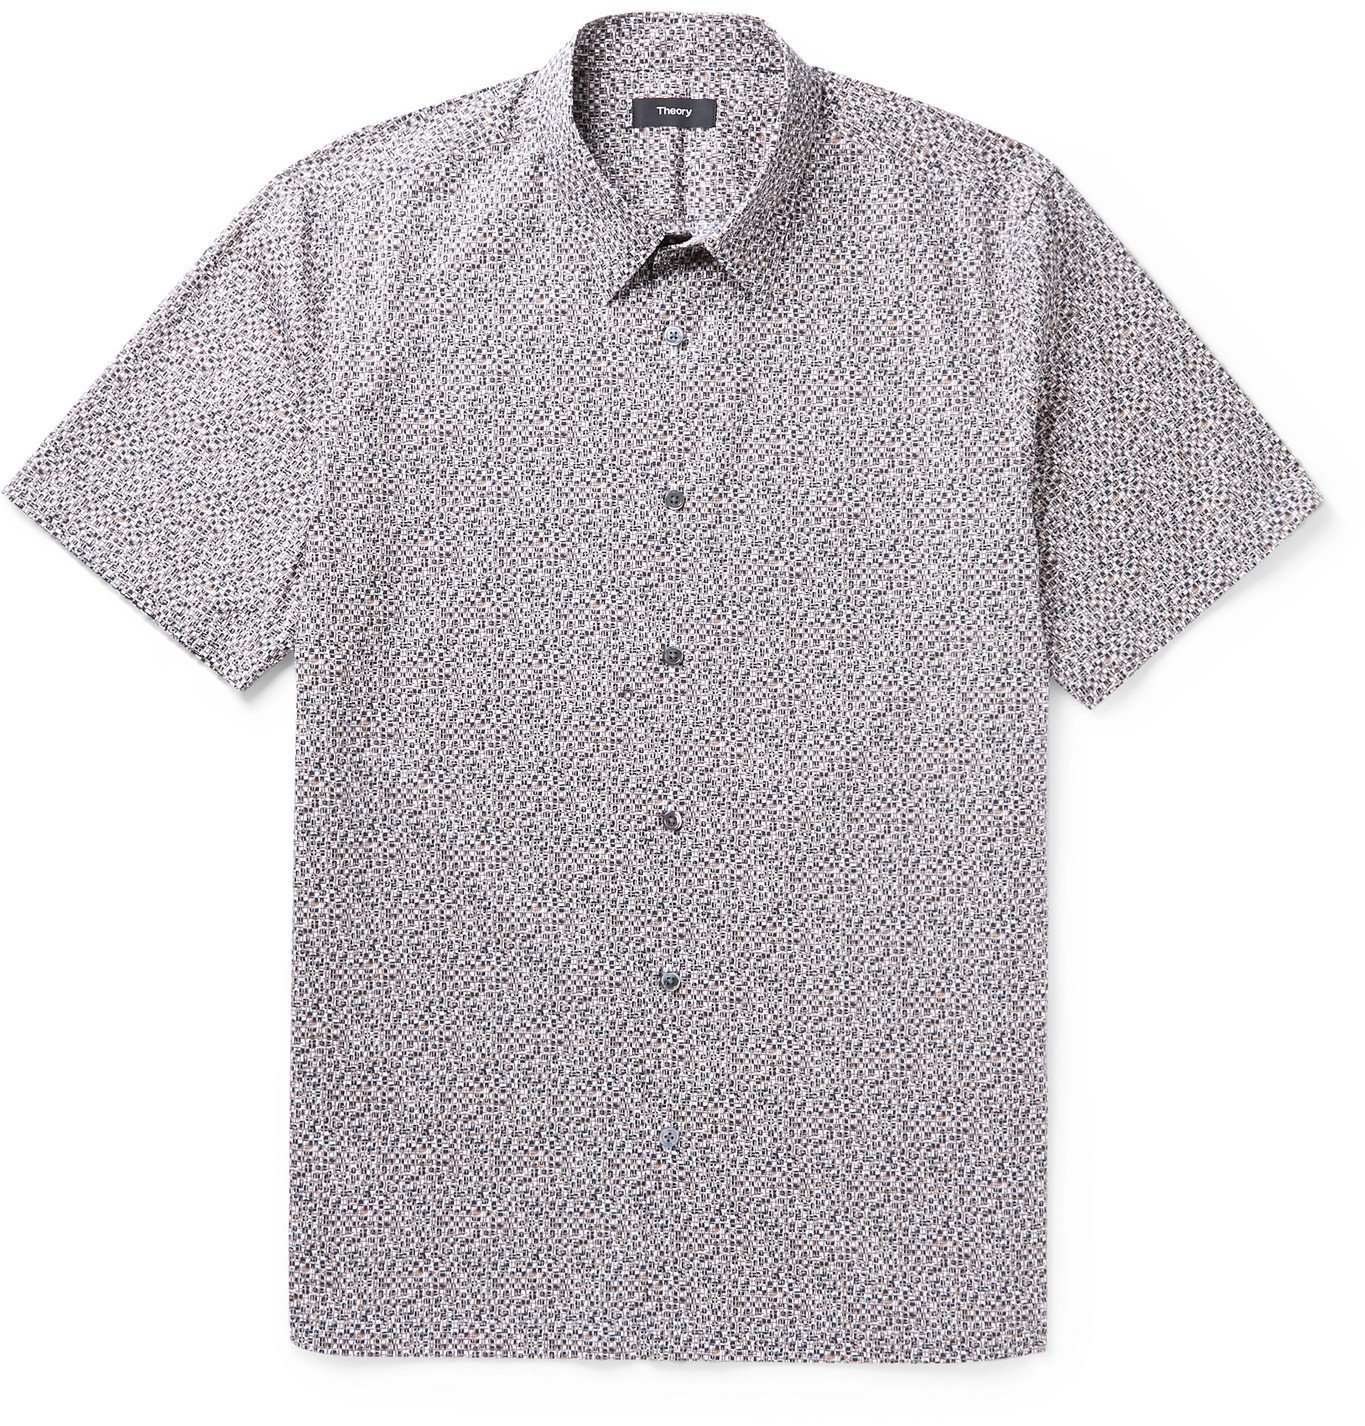 Theory - Irving Printed Stretch-Cotton Shirt - Gray Theory